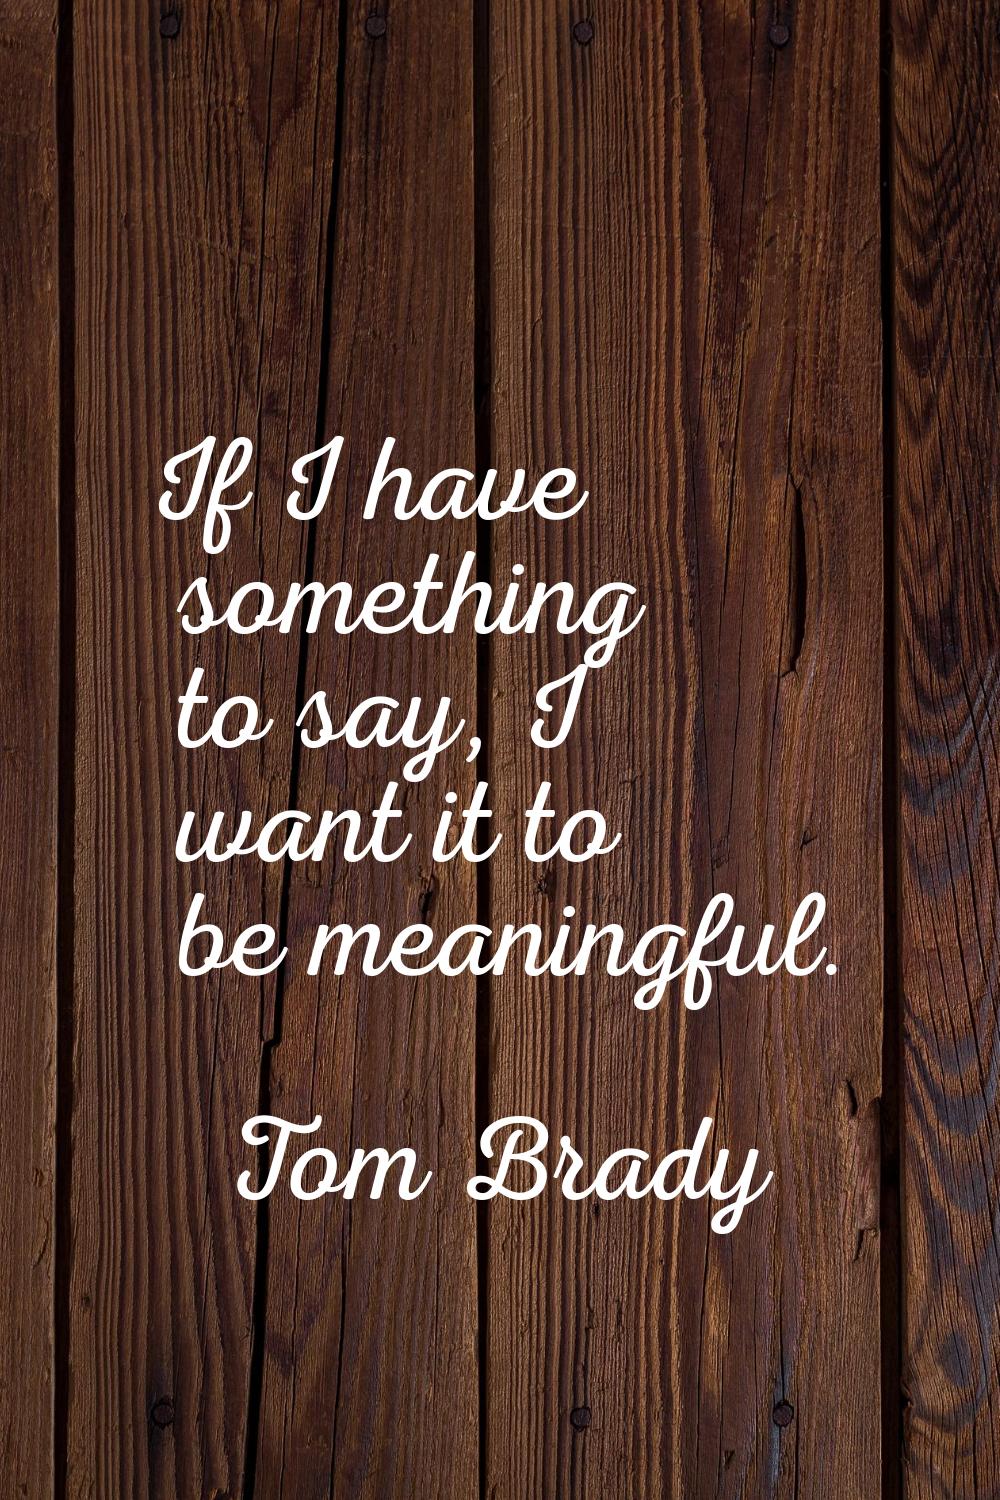 If I have something to say, I want it to be meaningful.